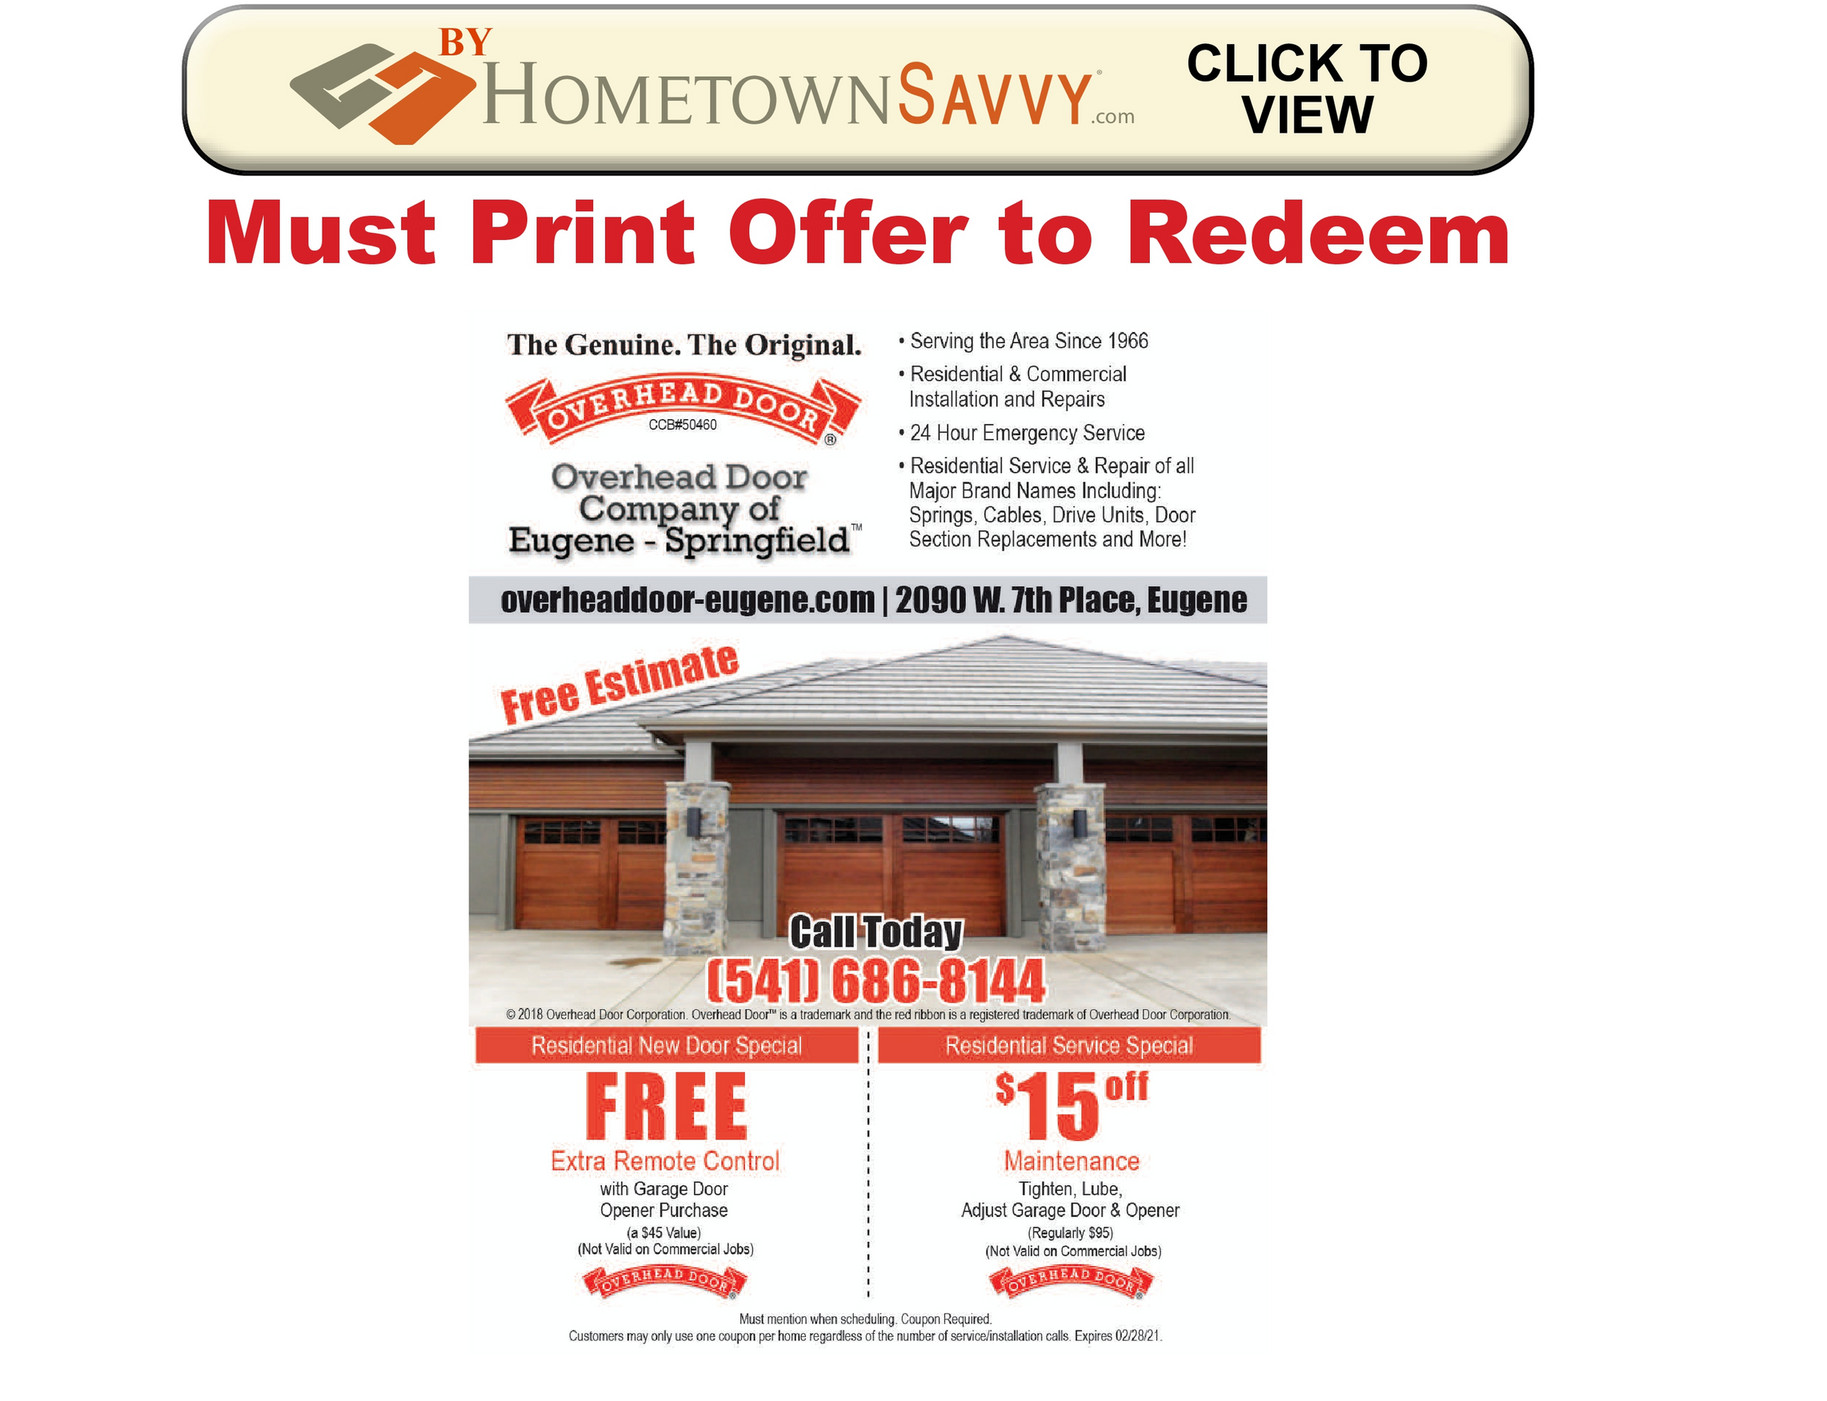 Overhead Door Coupon by Hometown Savvy Eugene Springfield OR Page 1